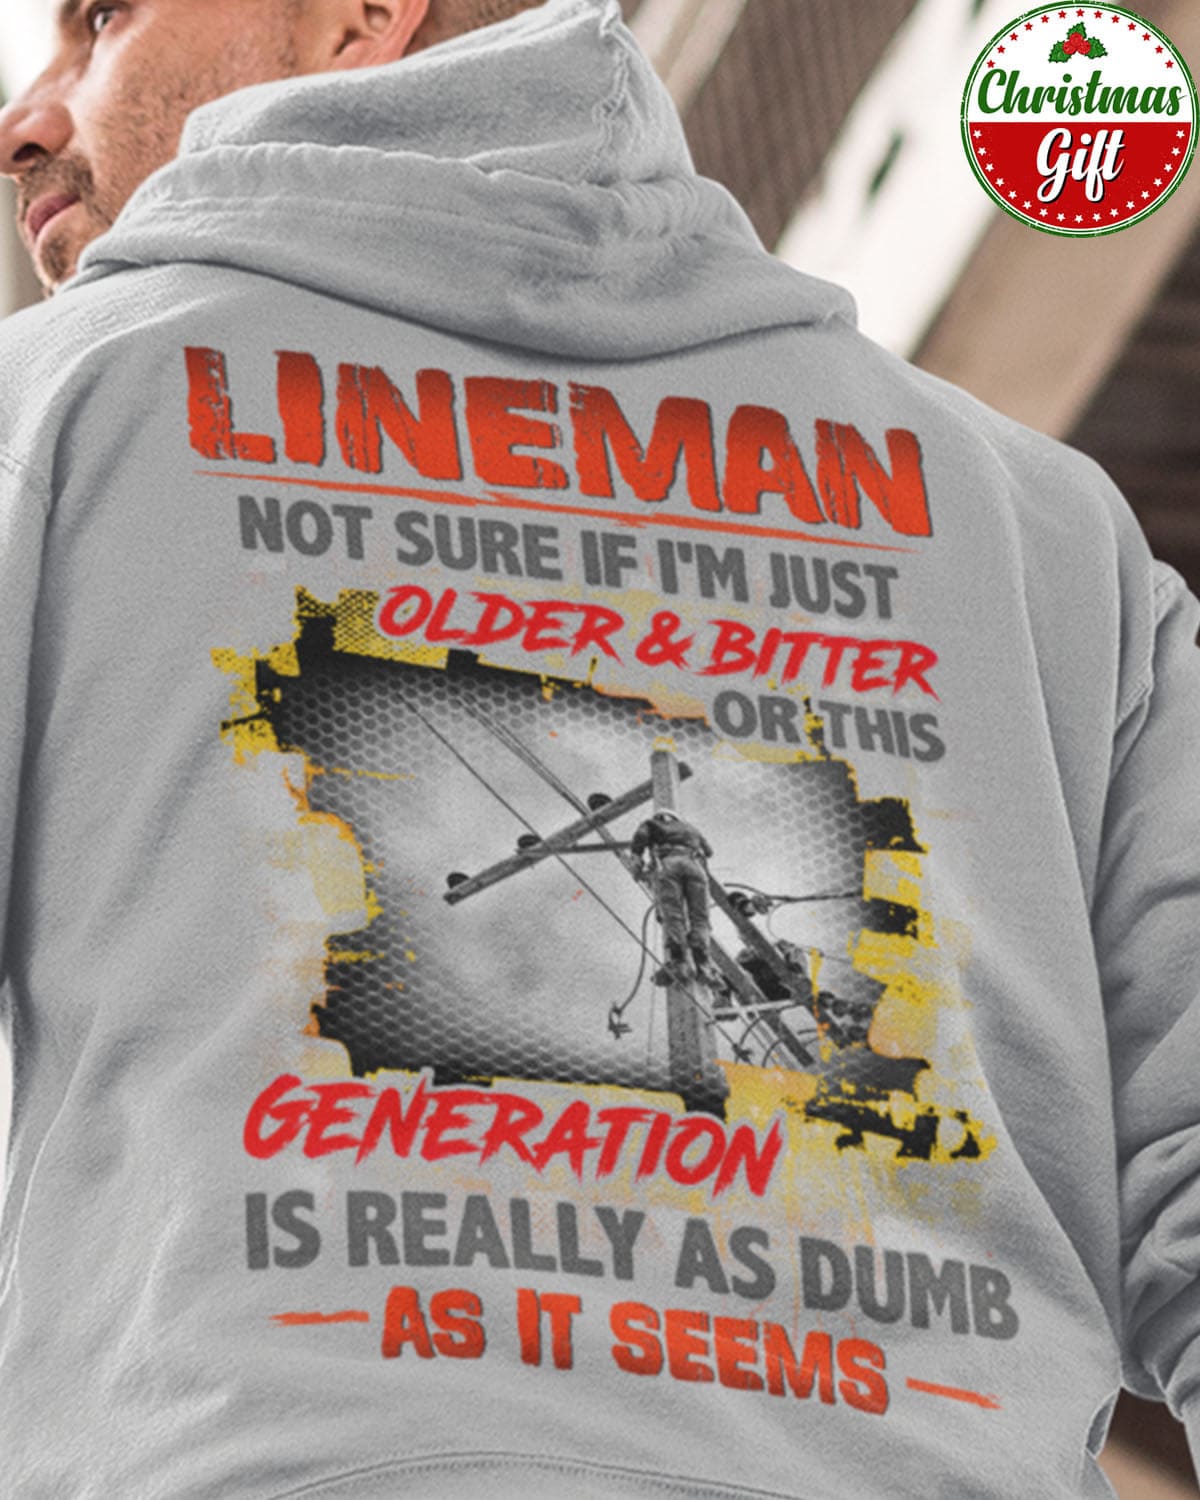 Lineman The Job - Lineman not sure if i'm just older and bitter or this generation is really as dumb as it seems